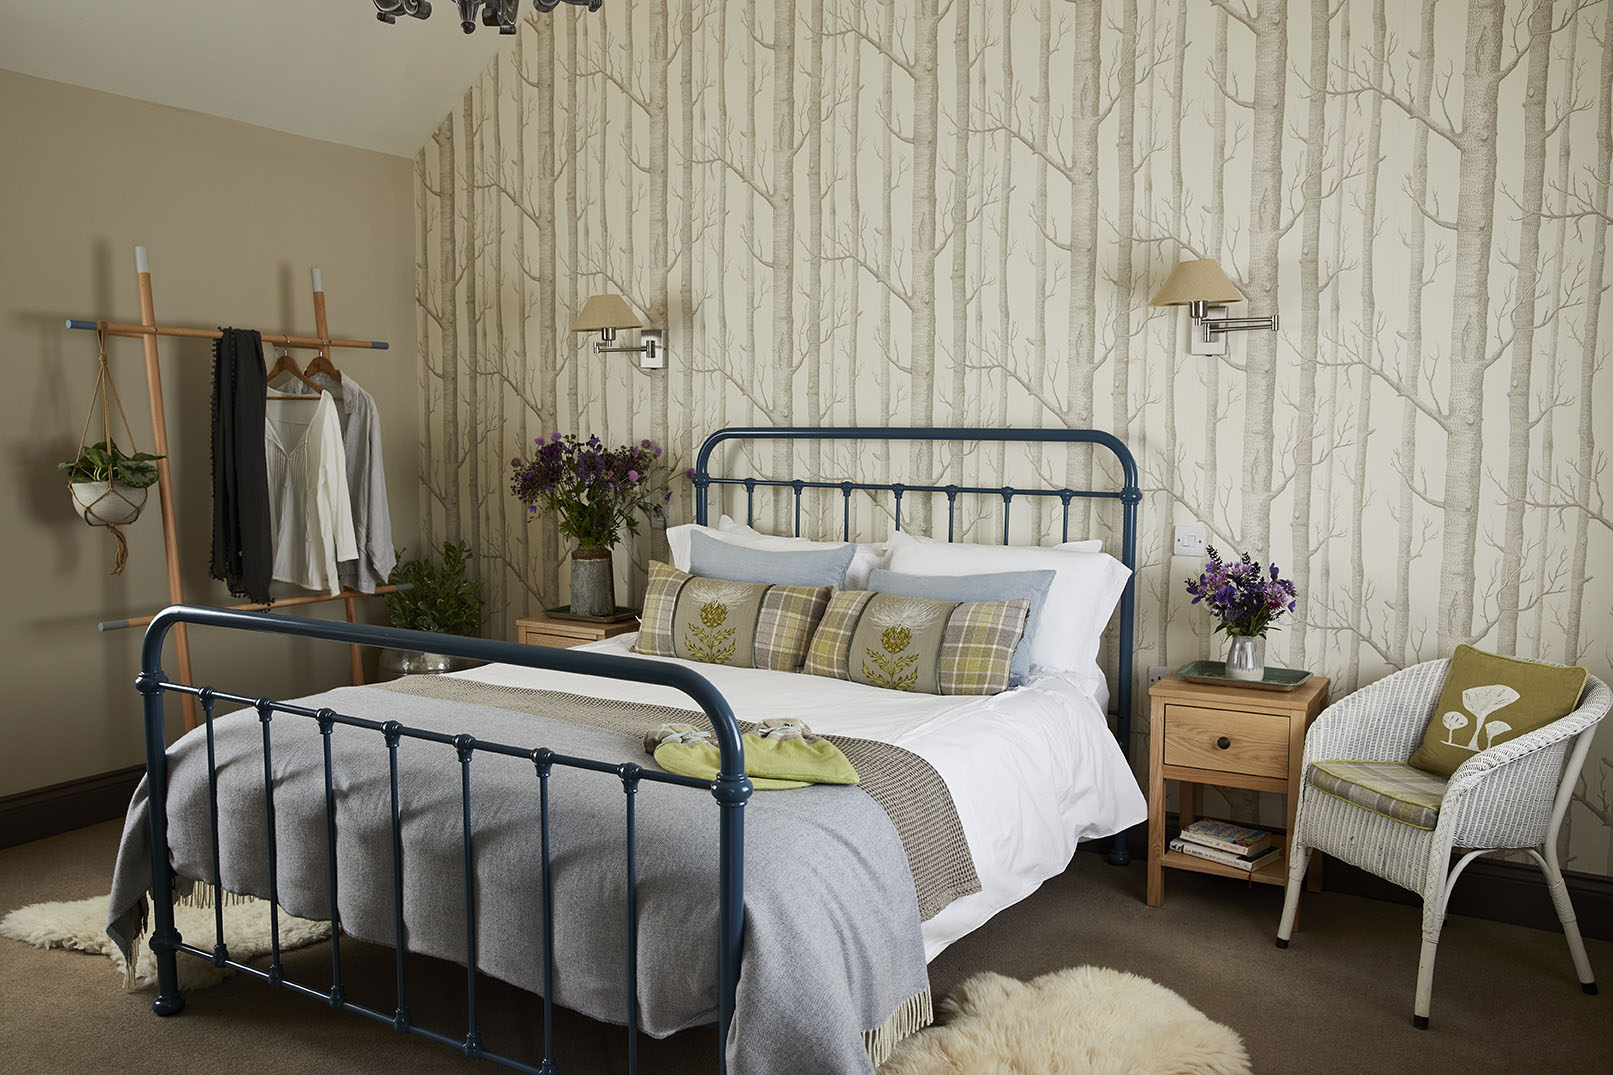 The long barn double bed at longlands, devon